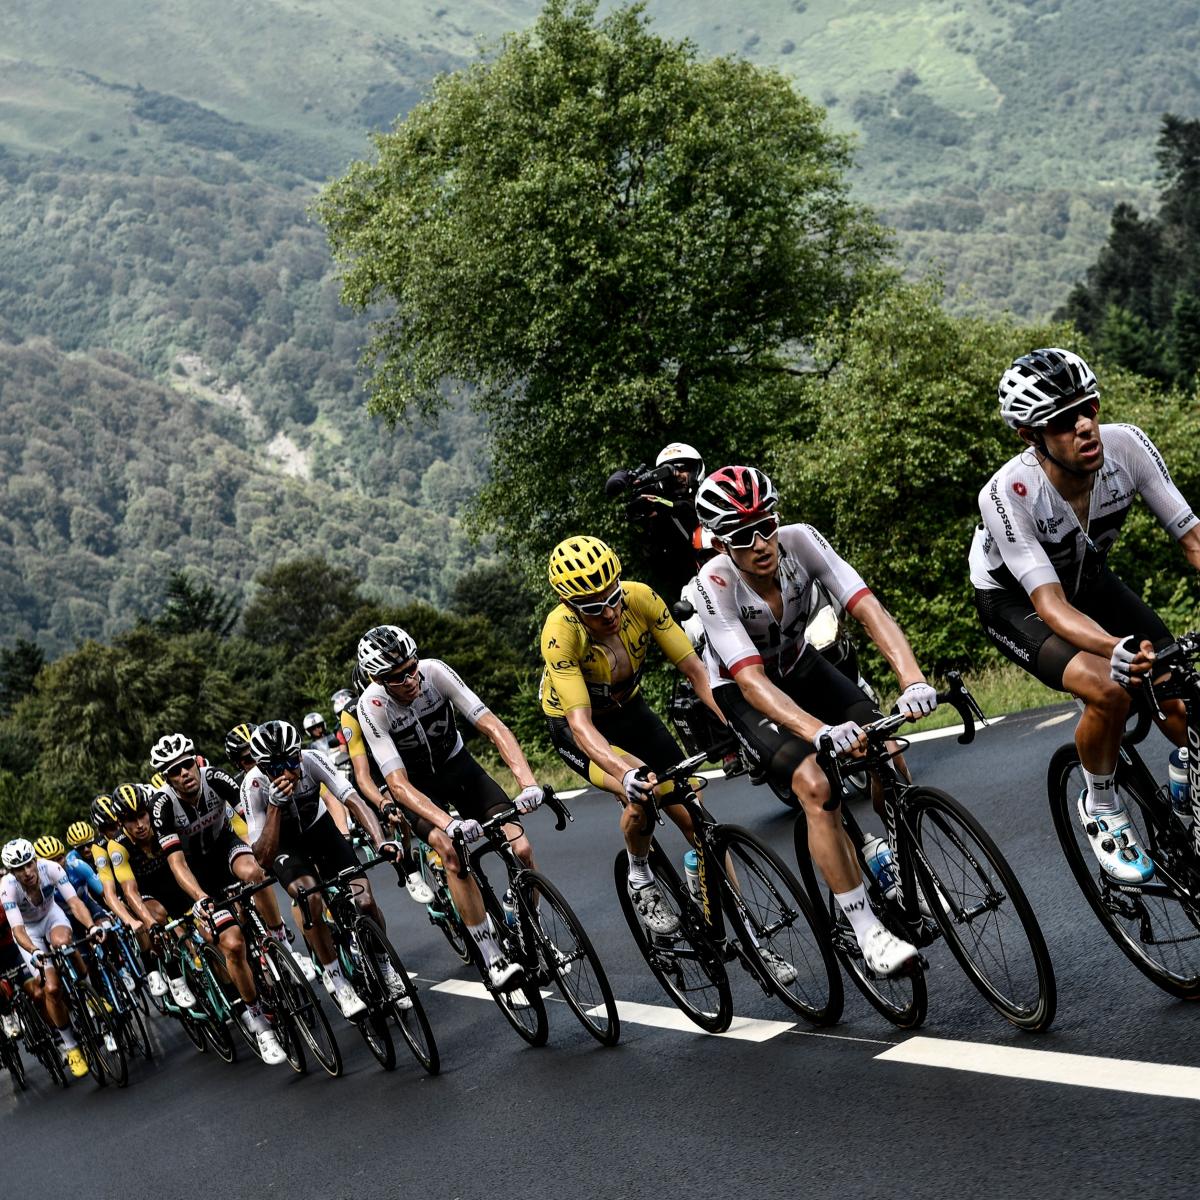 Tour de France 2018: Stage 20 Route, Live-Stream Schedule, TV Info for